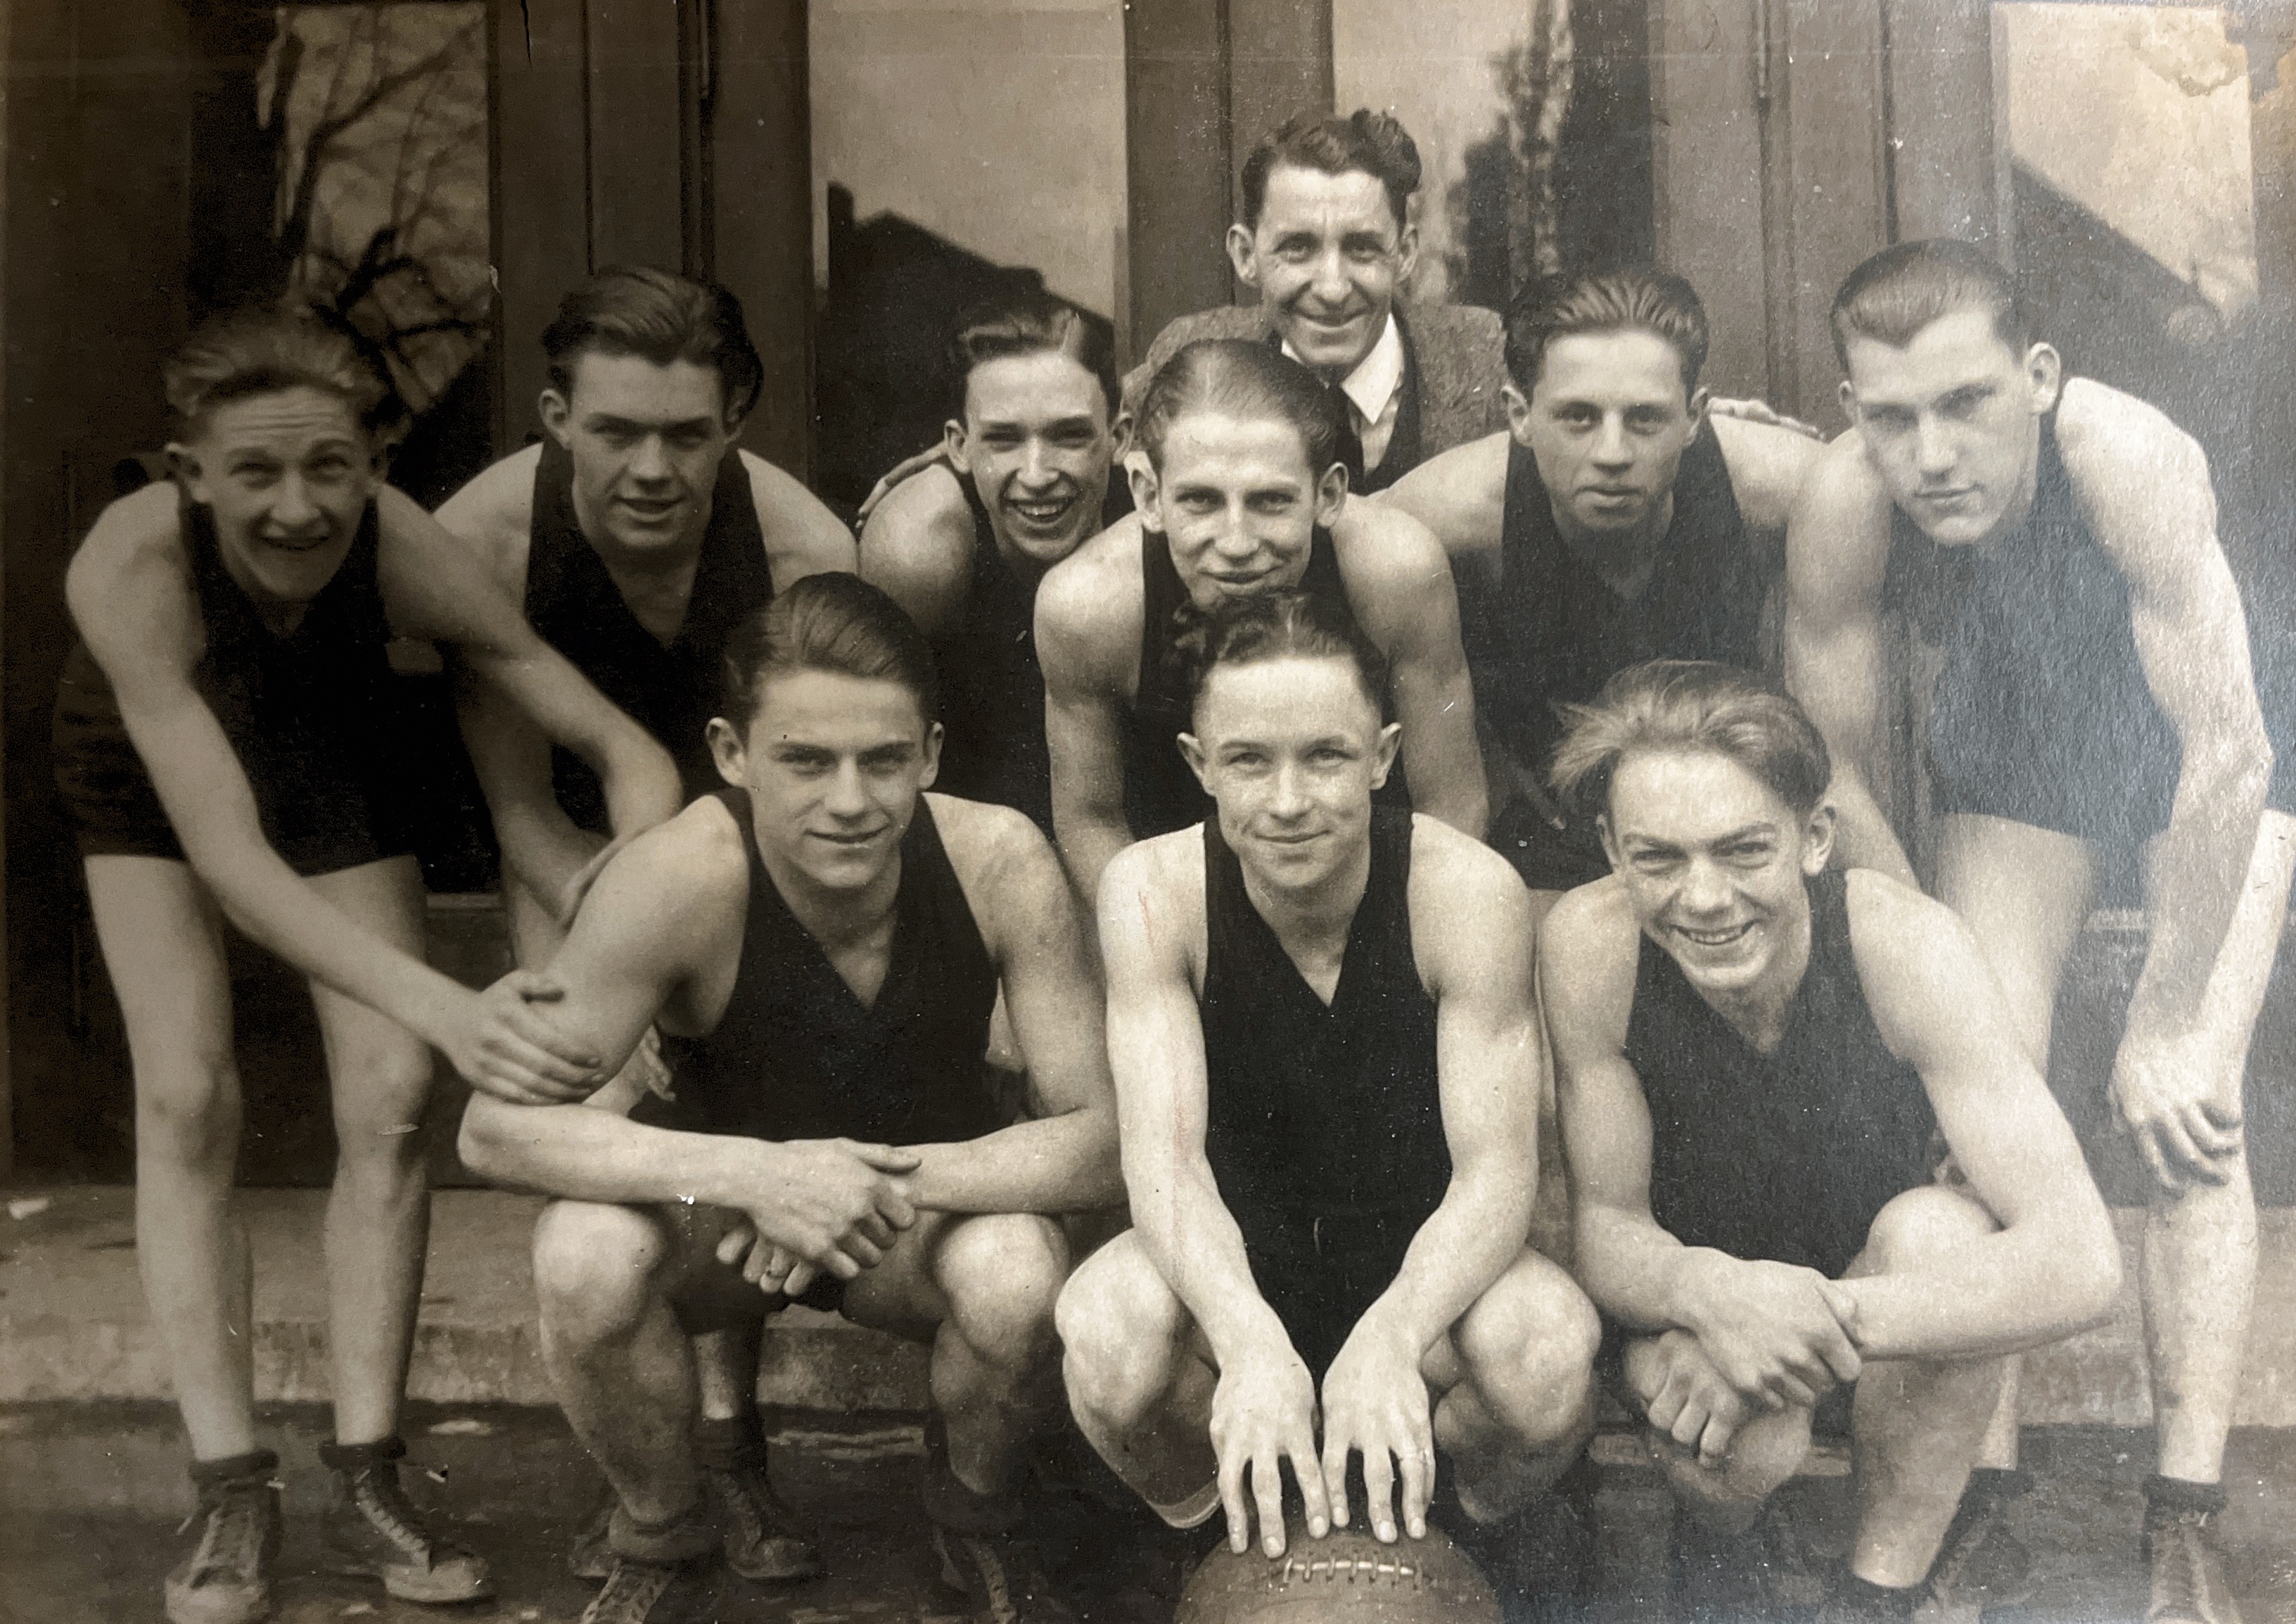 My dad’s basketball team . He’s the one on the lower right. Neal Andrew Swearingen 1906-1997